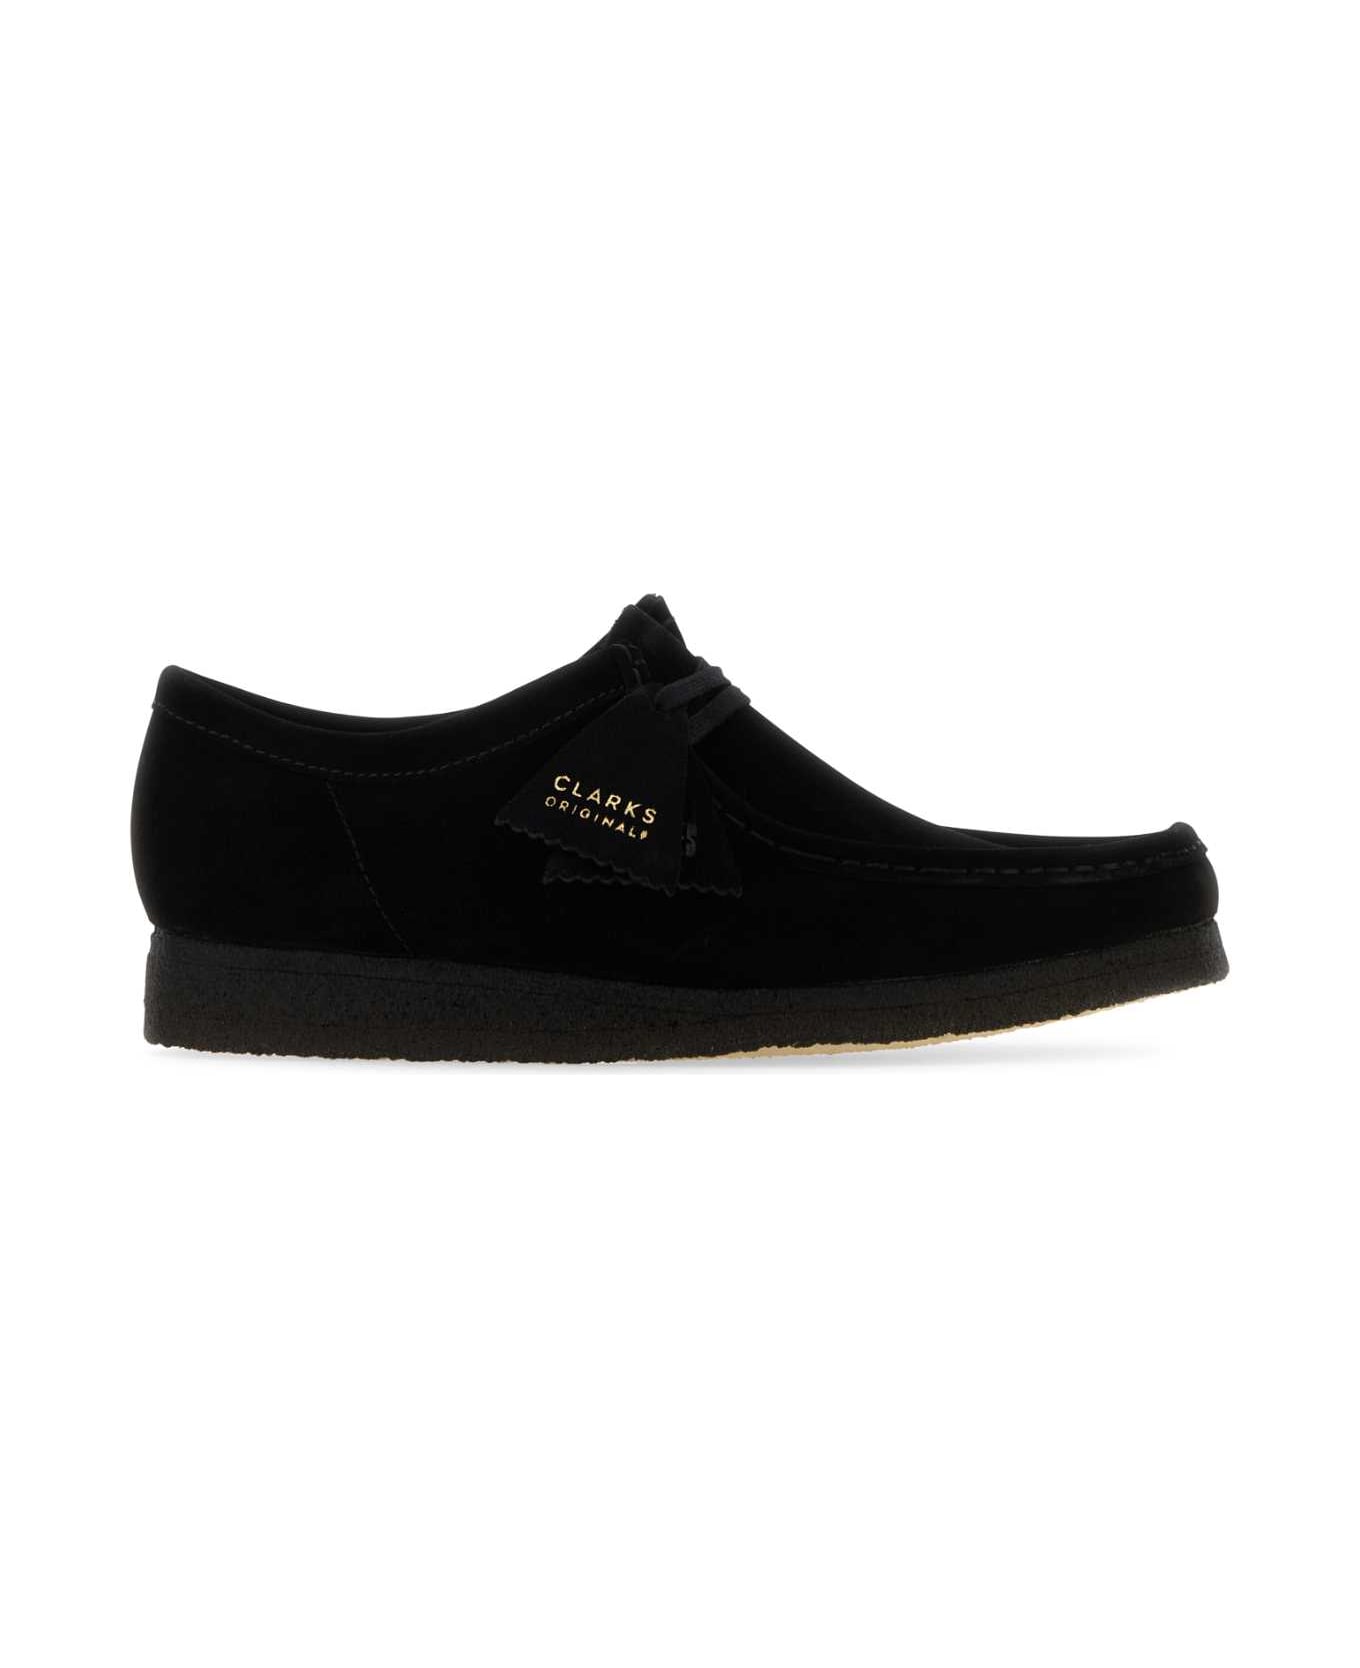 Clarks Black Suede Wallabee Ankle Boots - BLACKSDE ブーツ